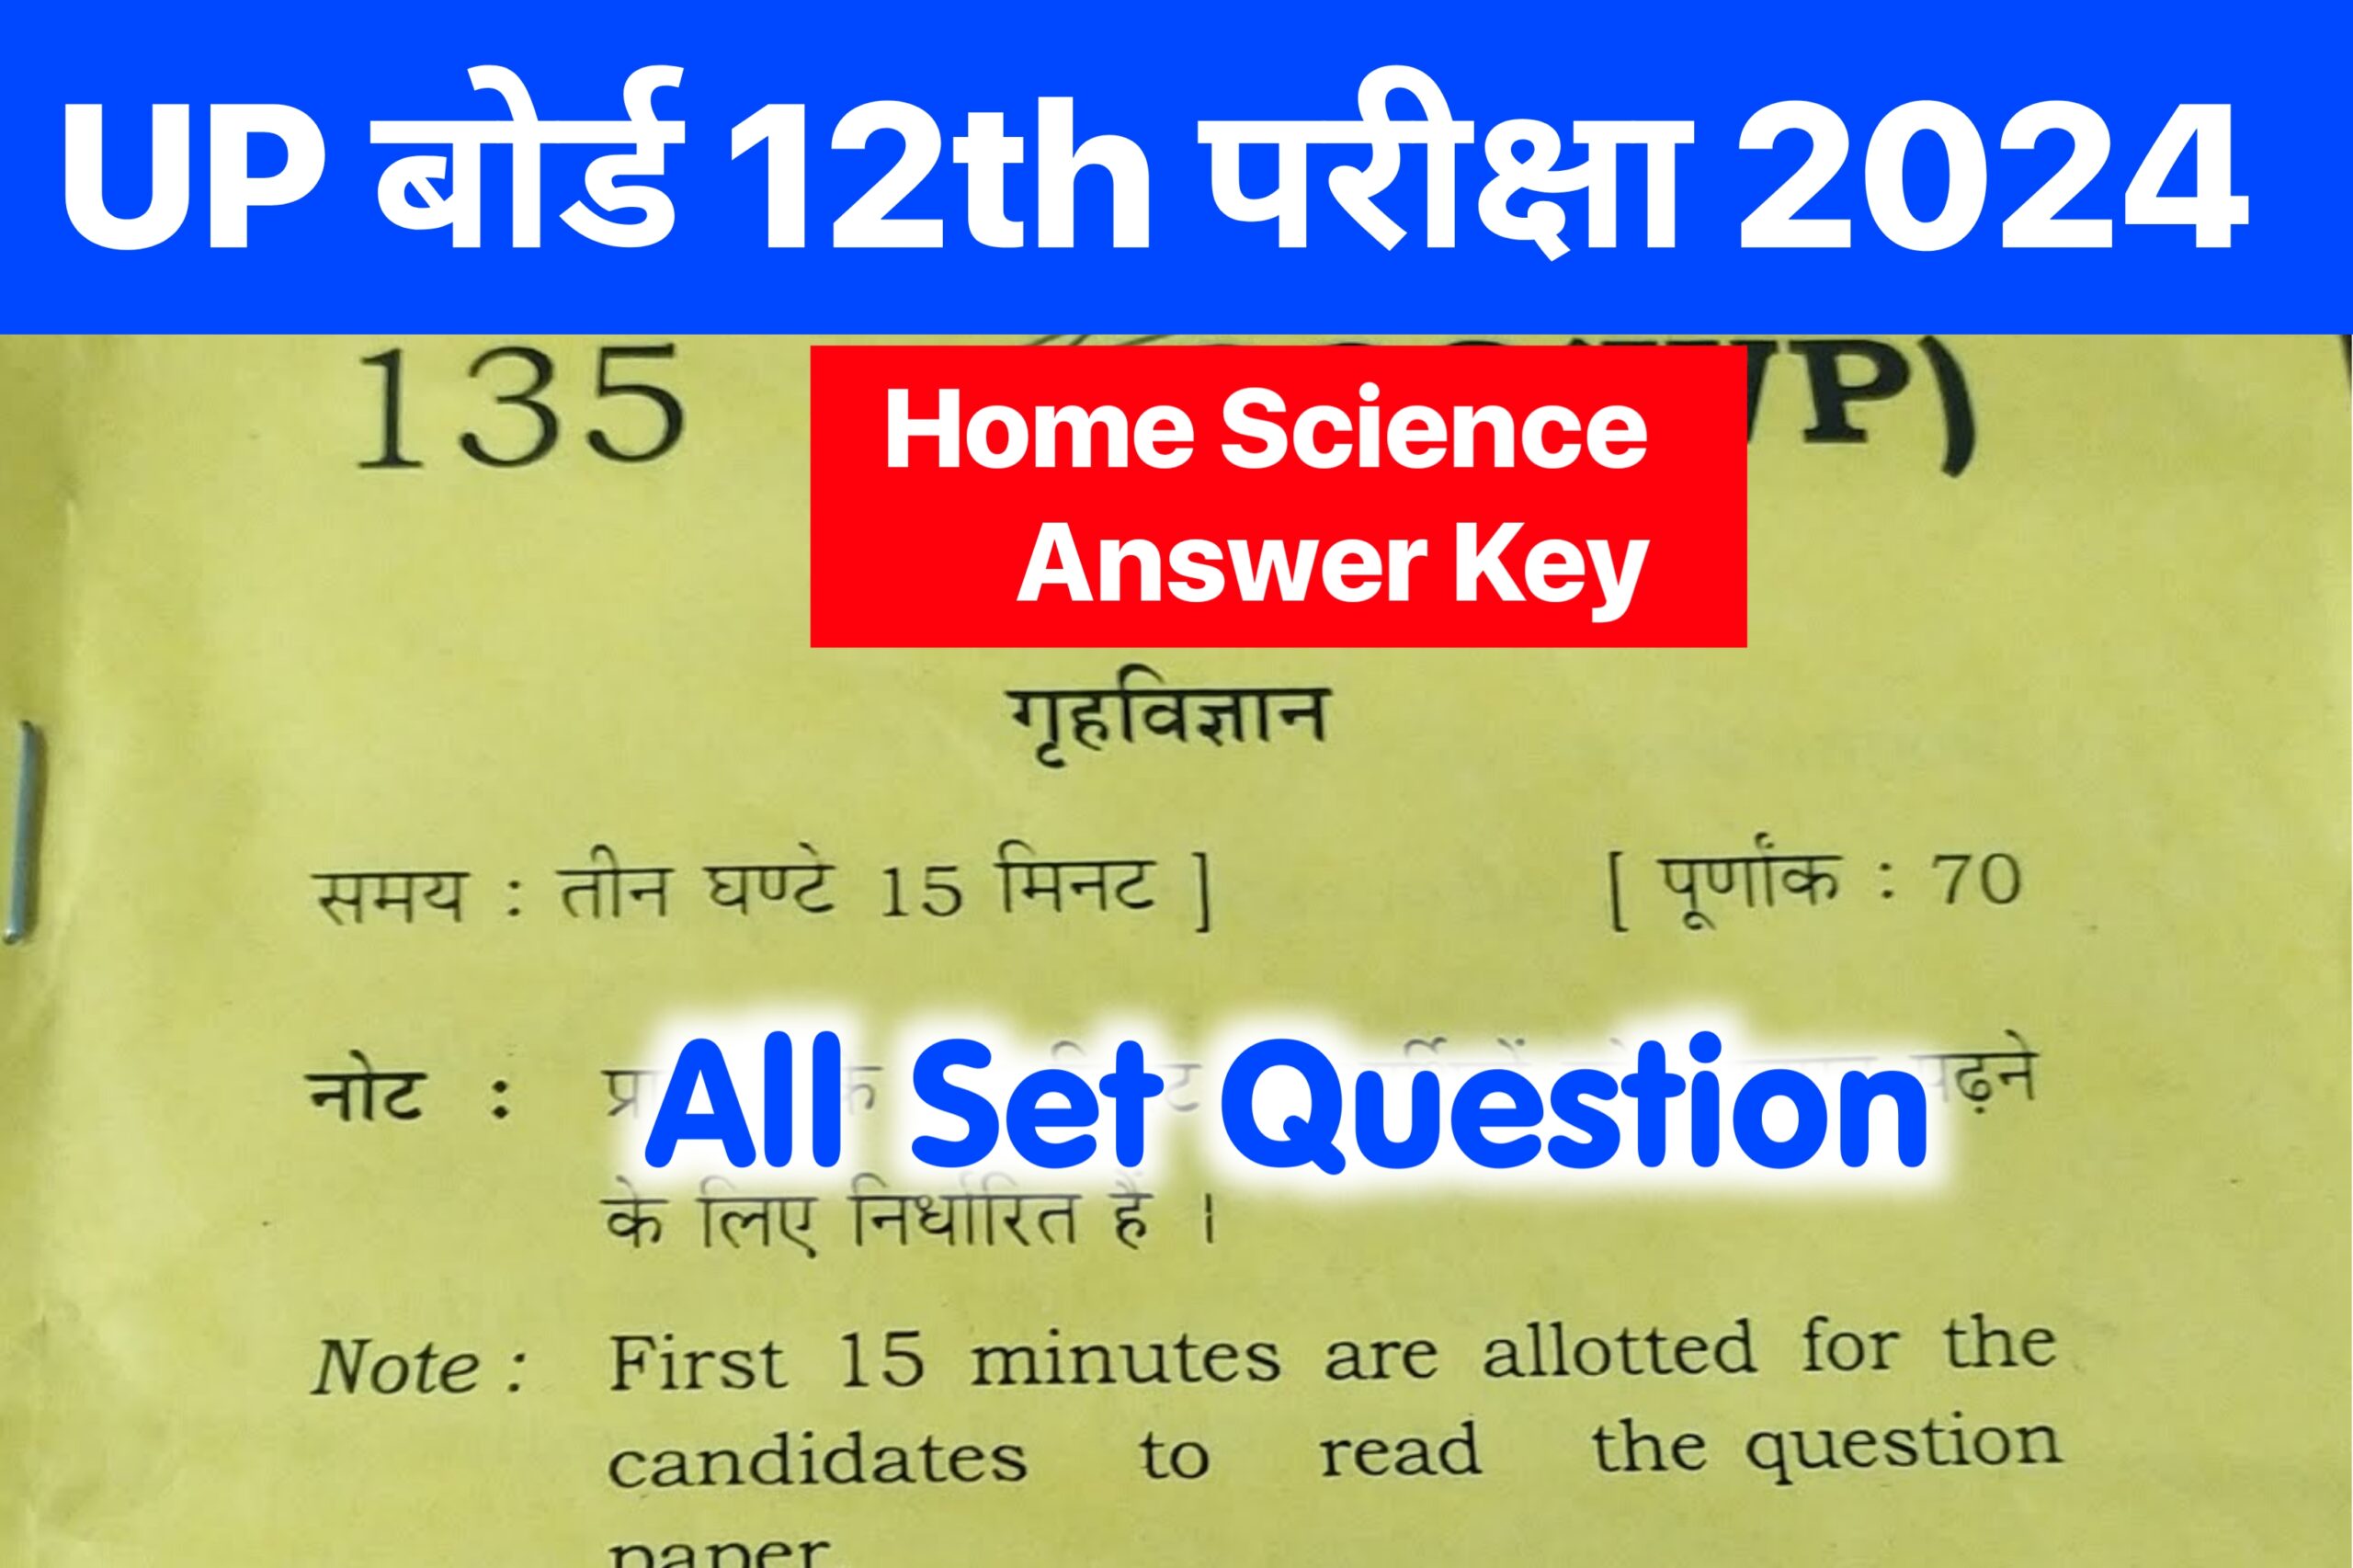 UP Board 12th Home Science Answer Key 2024 , (101% सही उत्तर) UP Board 12th Home Science Question Paper 2024